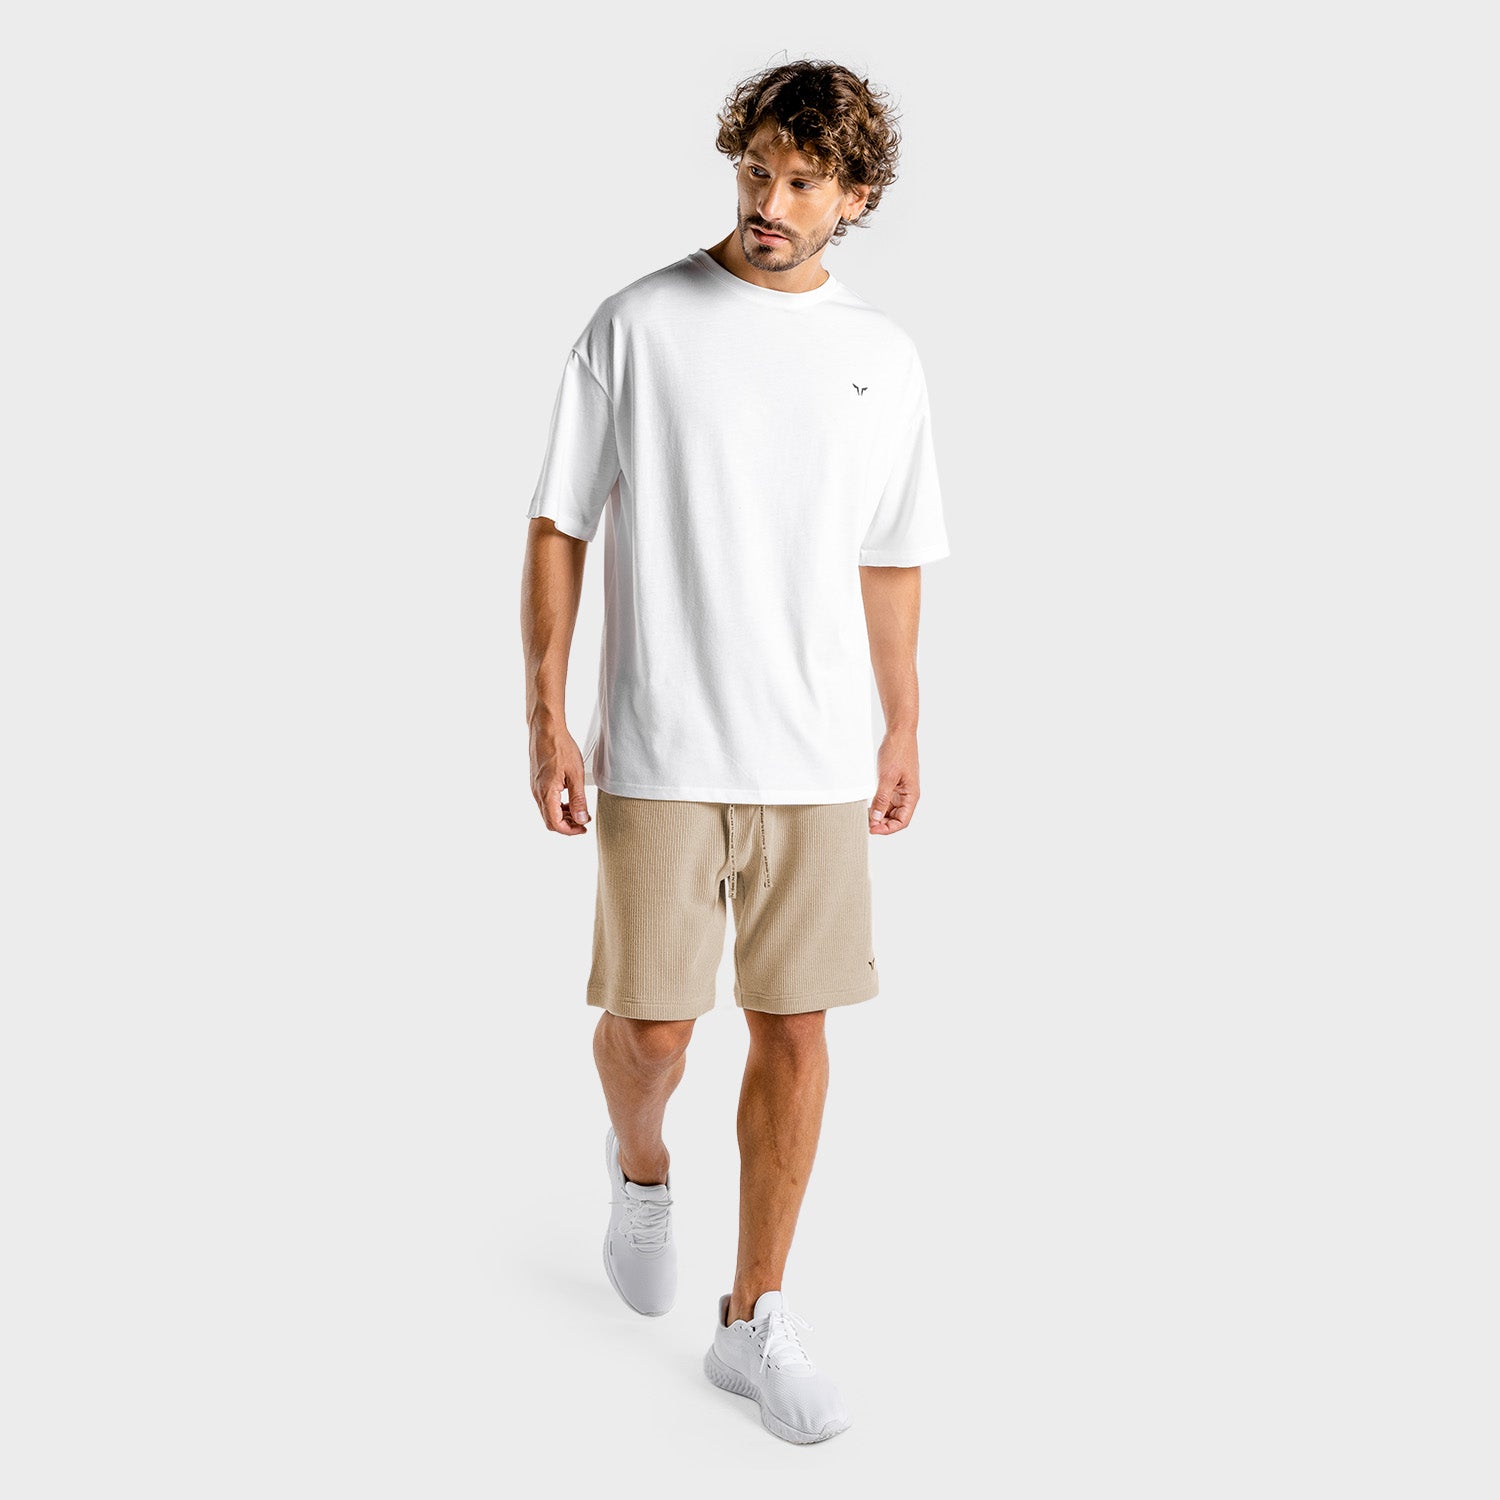 squatwolf-workout-shirts-for-men-luxe-oversize-tee-white-gym-wear